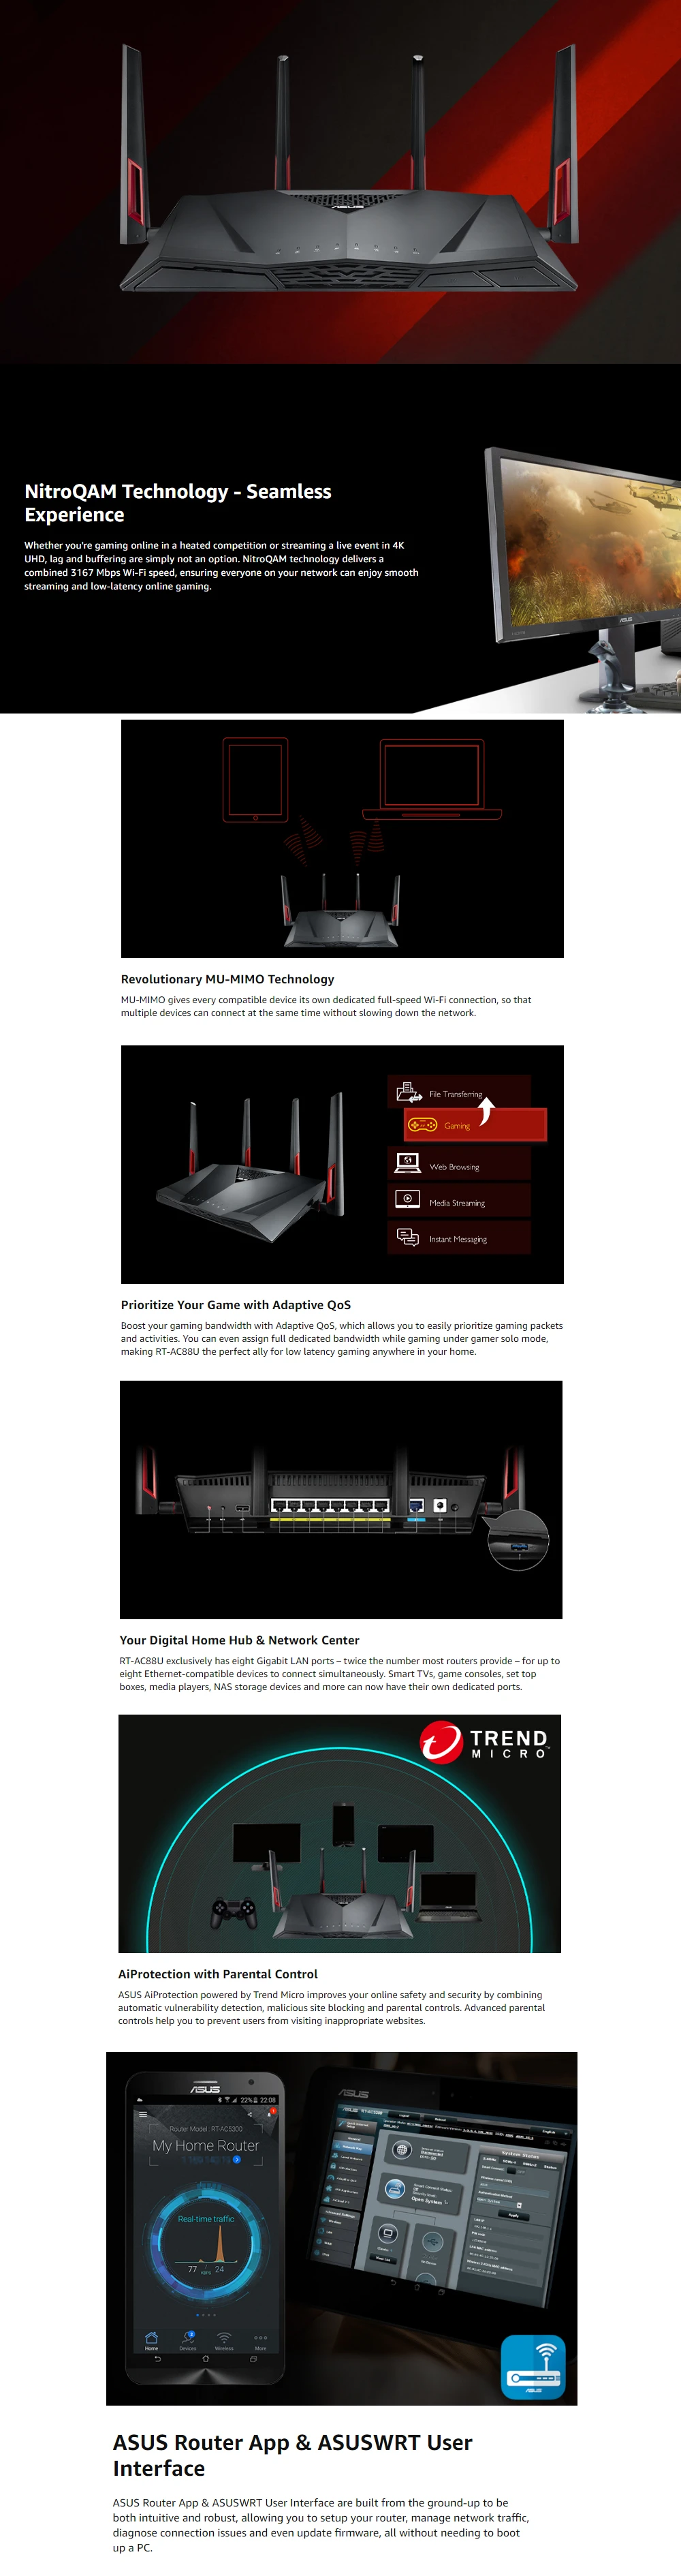 ASUS RT-AC88U Dual Band Gigabit WiFi Gaming Router with MU-MIMO Mesh WiFi System 3167MBps WTFast game accelerator Enterprise-class home wifi router